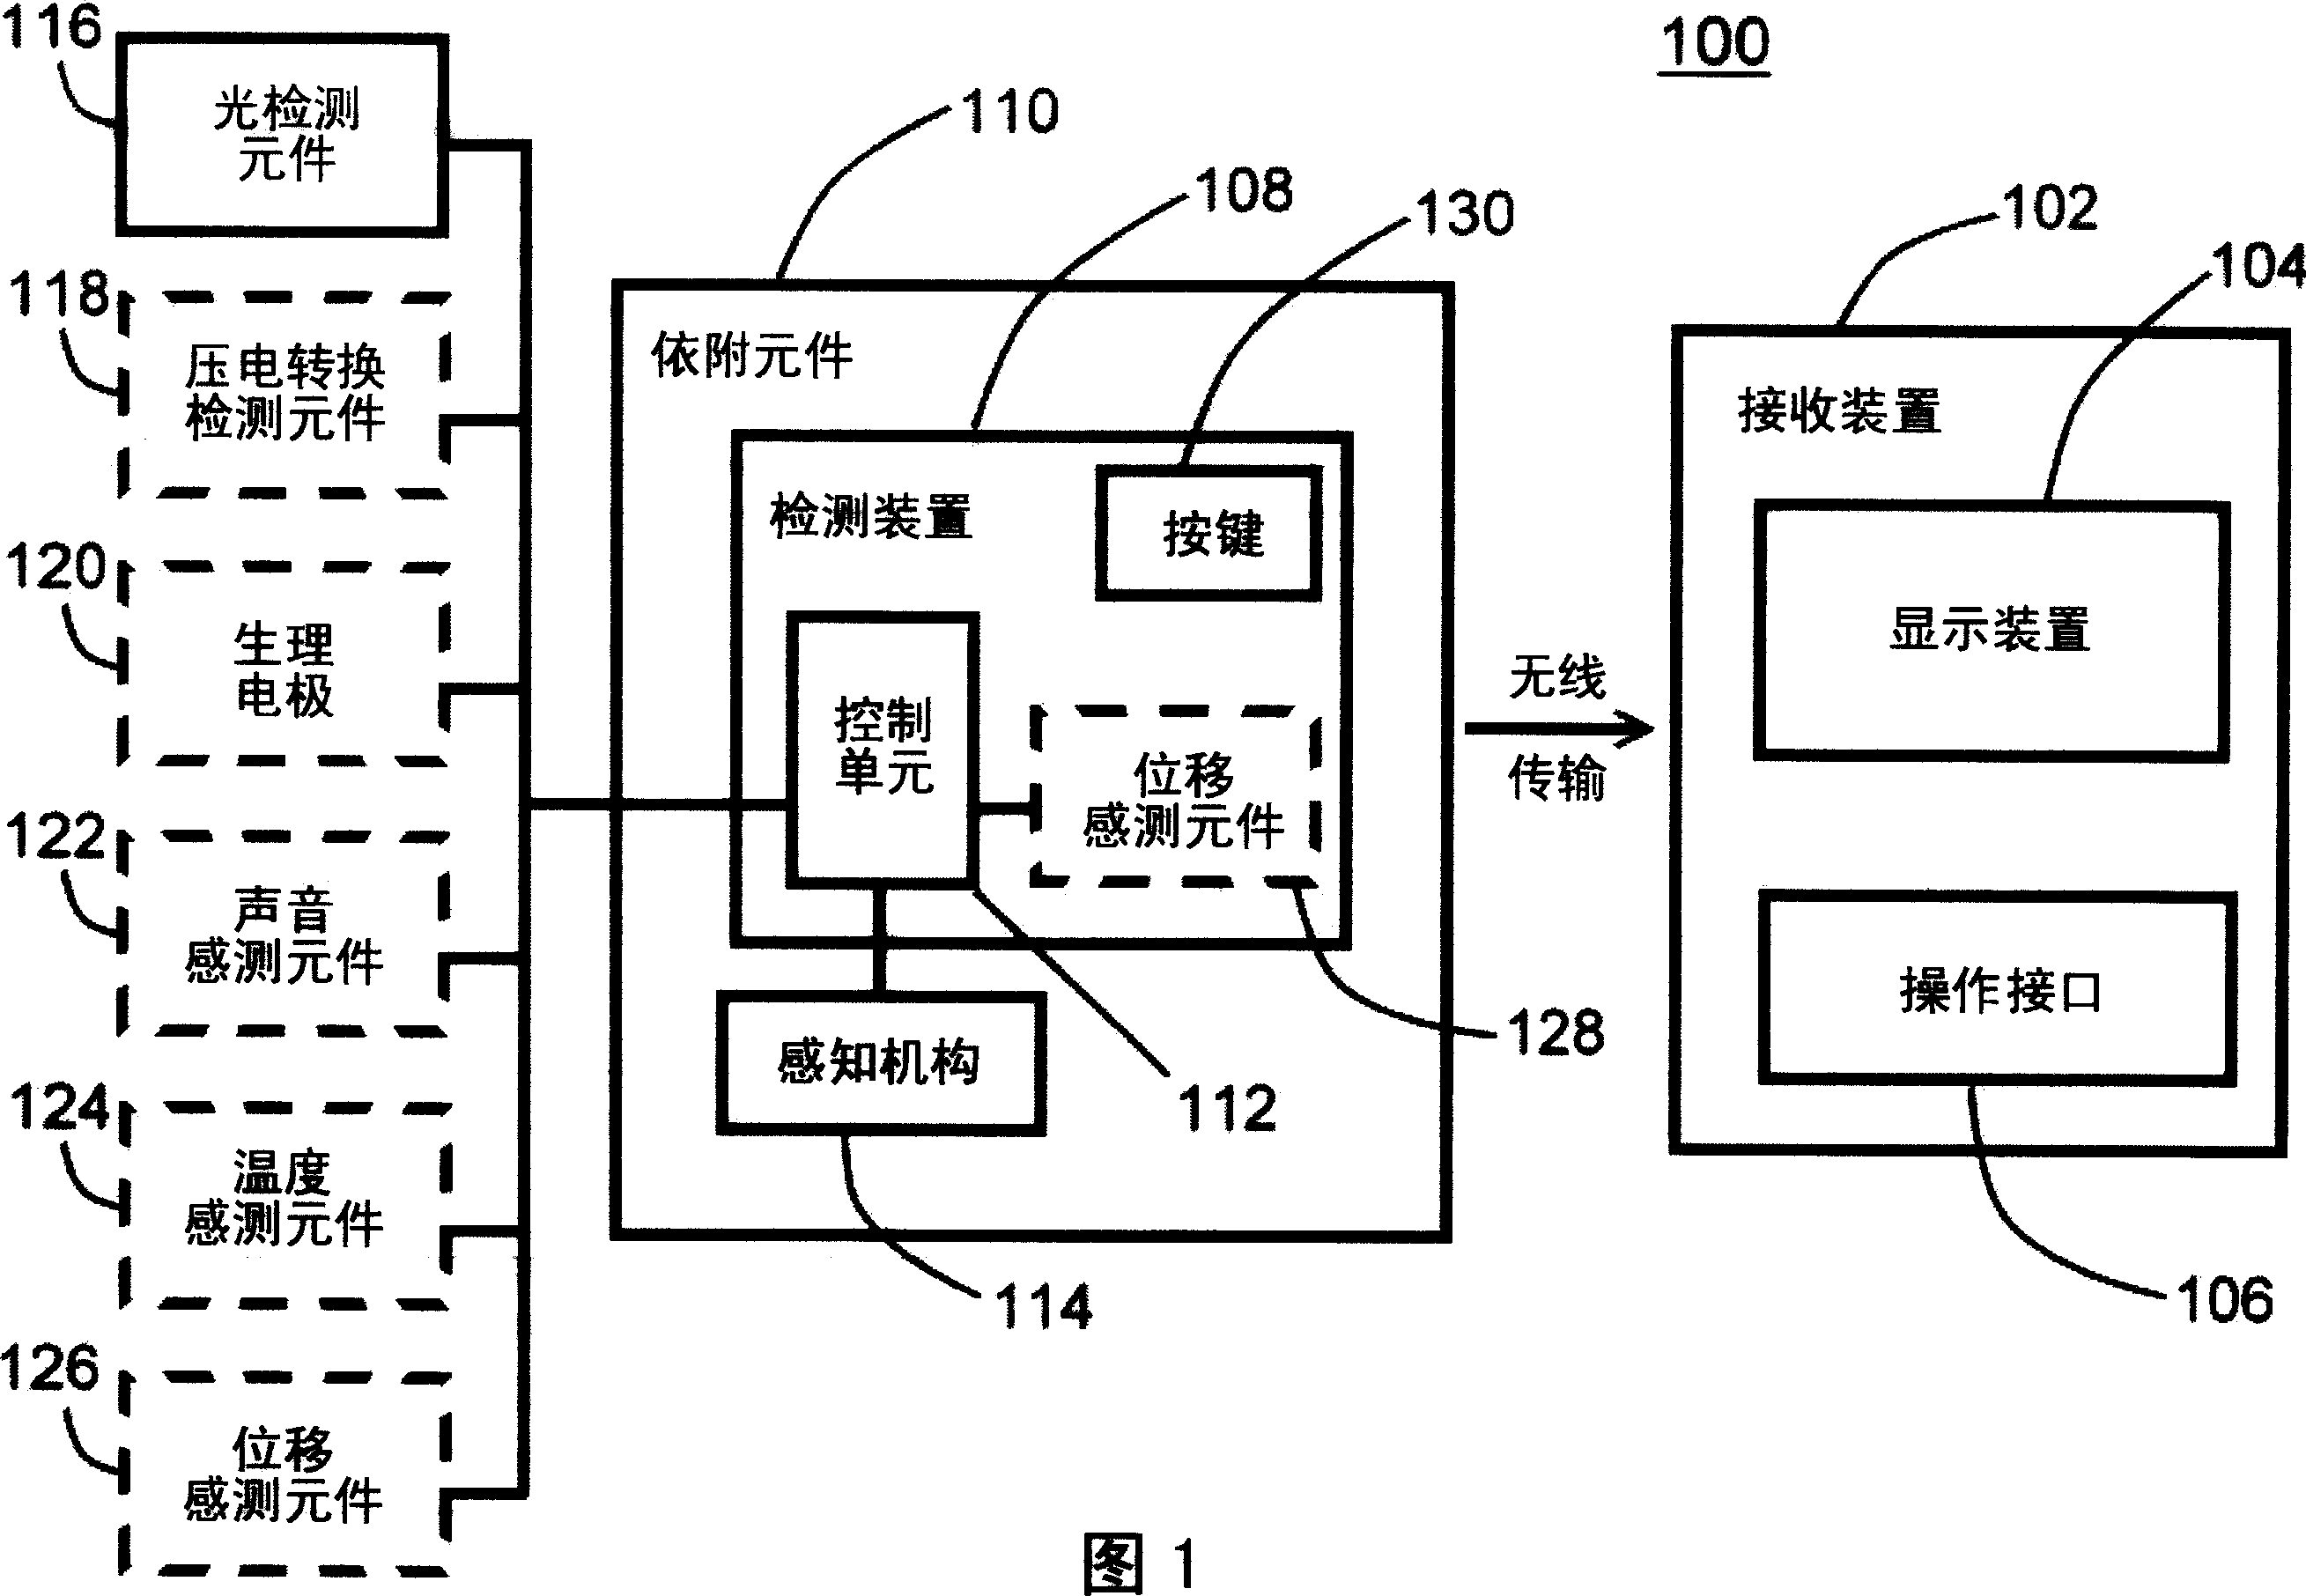 Non-invasive life evidence monitor, monitor system and method